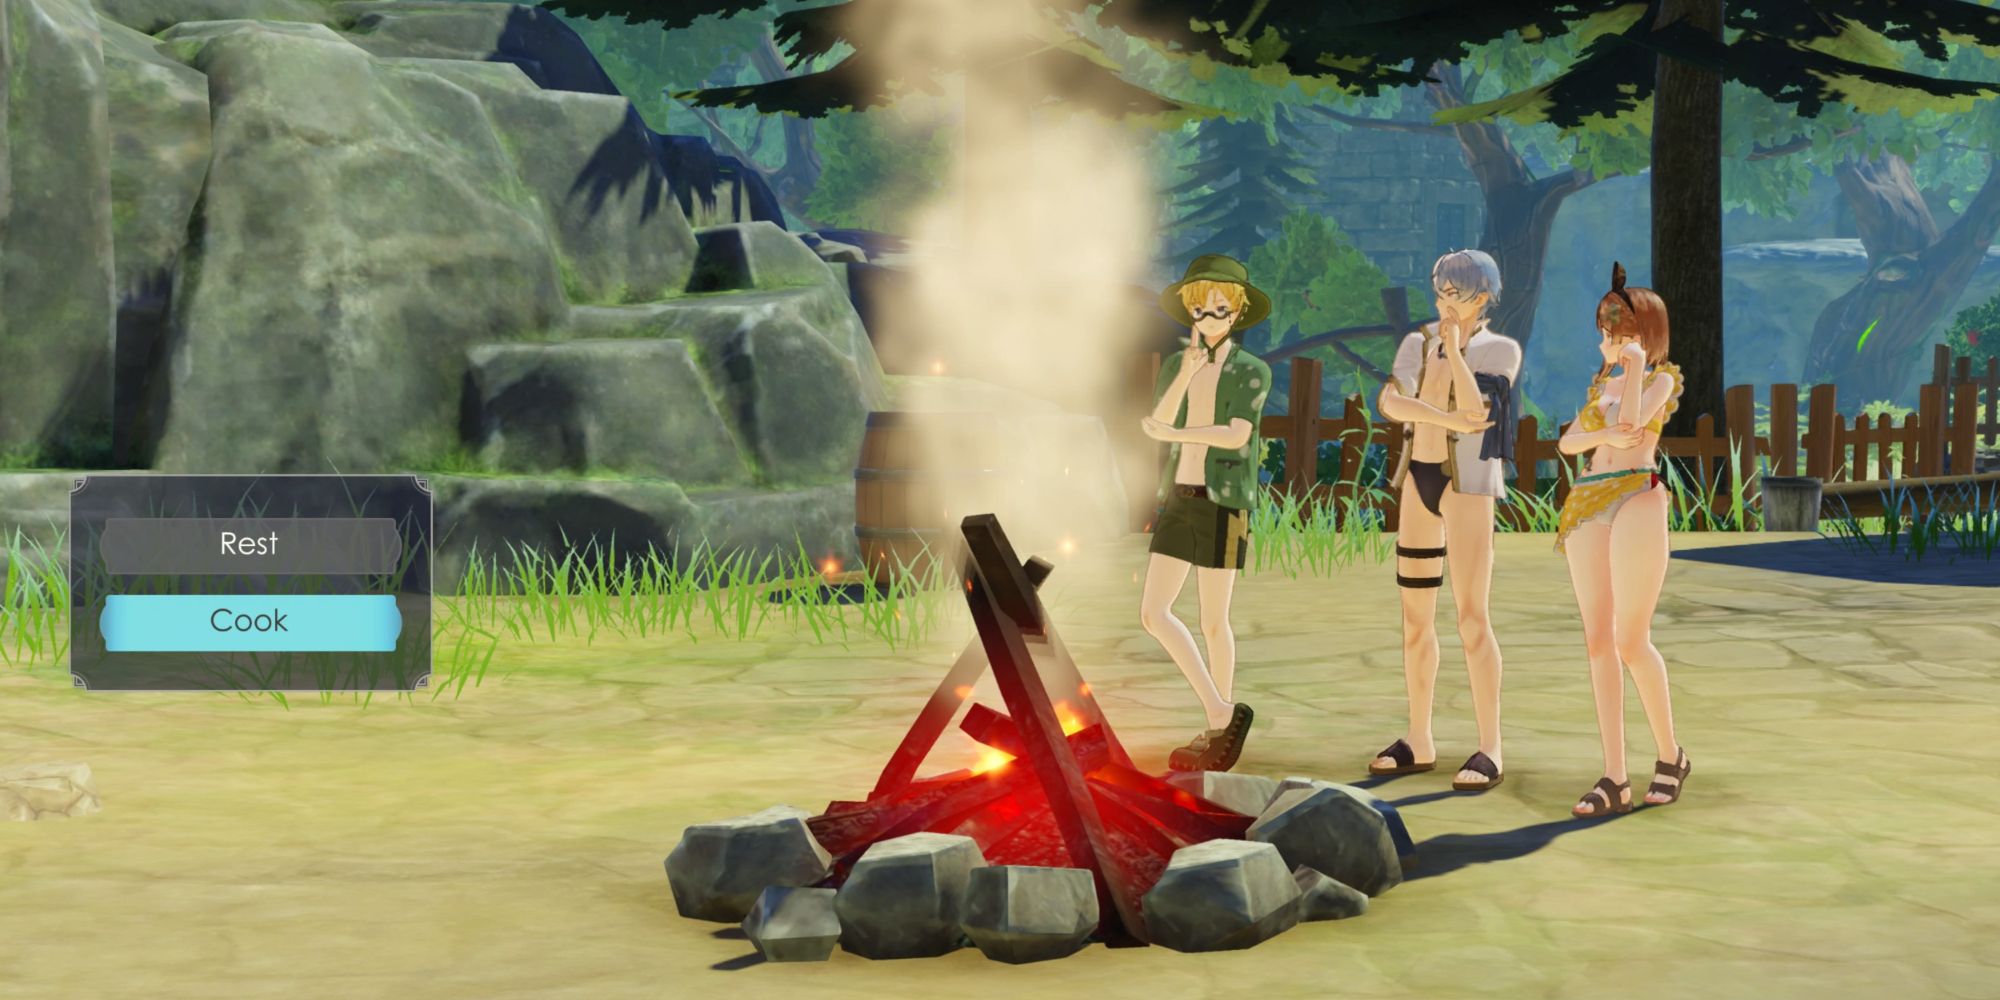 An image of Tao, Bos, and Ryza getting ready to Cook in Atelier Ryza 3: Alchemist of the End & the Secret Key